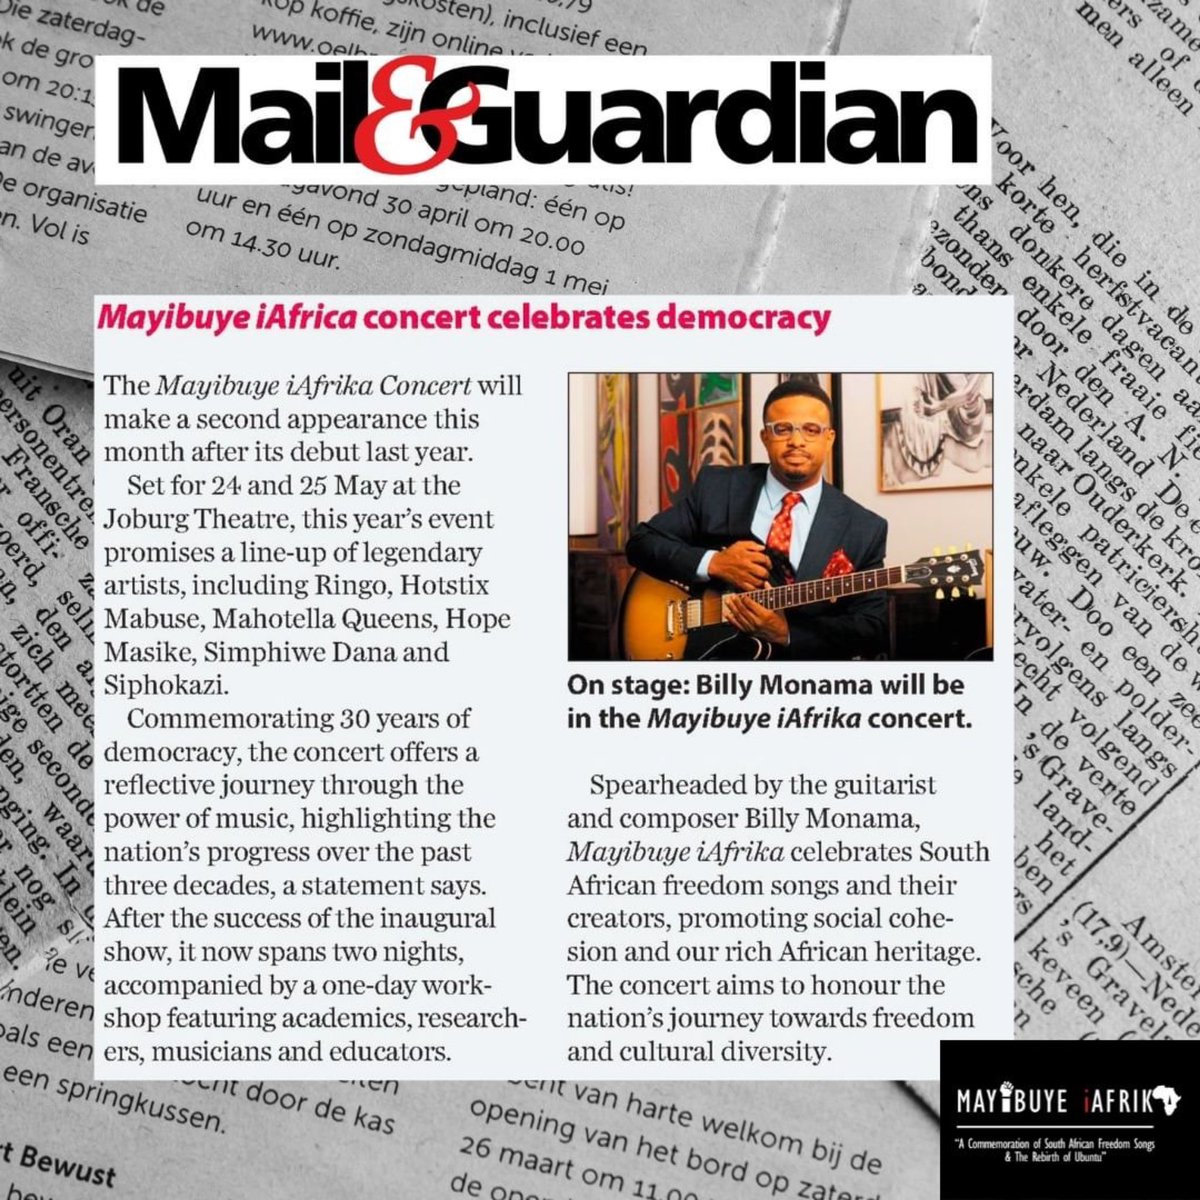 Don't miss out on the hottest music event of the year! Grab your copy of today’s @mailandguardian & get the inside scoop on the Mayibuye iAfrika Music concert. Join us as we celebrate #AfricaMonth & #30yearsOfDemocracy. 🗓️ 24 & 25 May 🎭 @joburgtheatre 🎫R250-R550 @webtickets